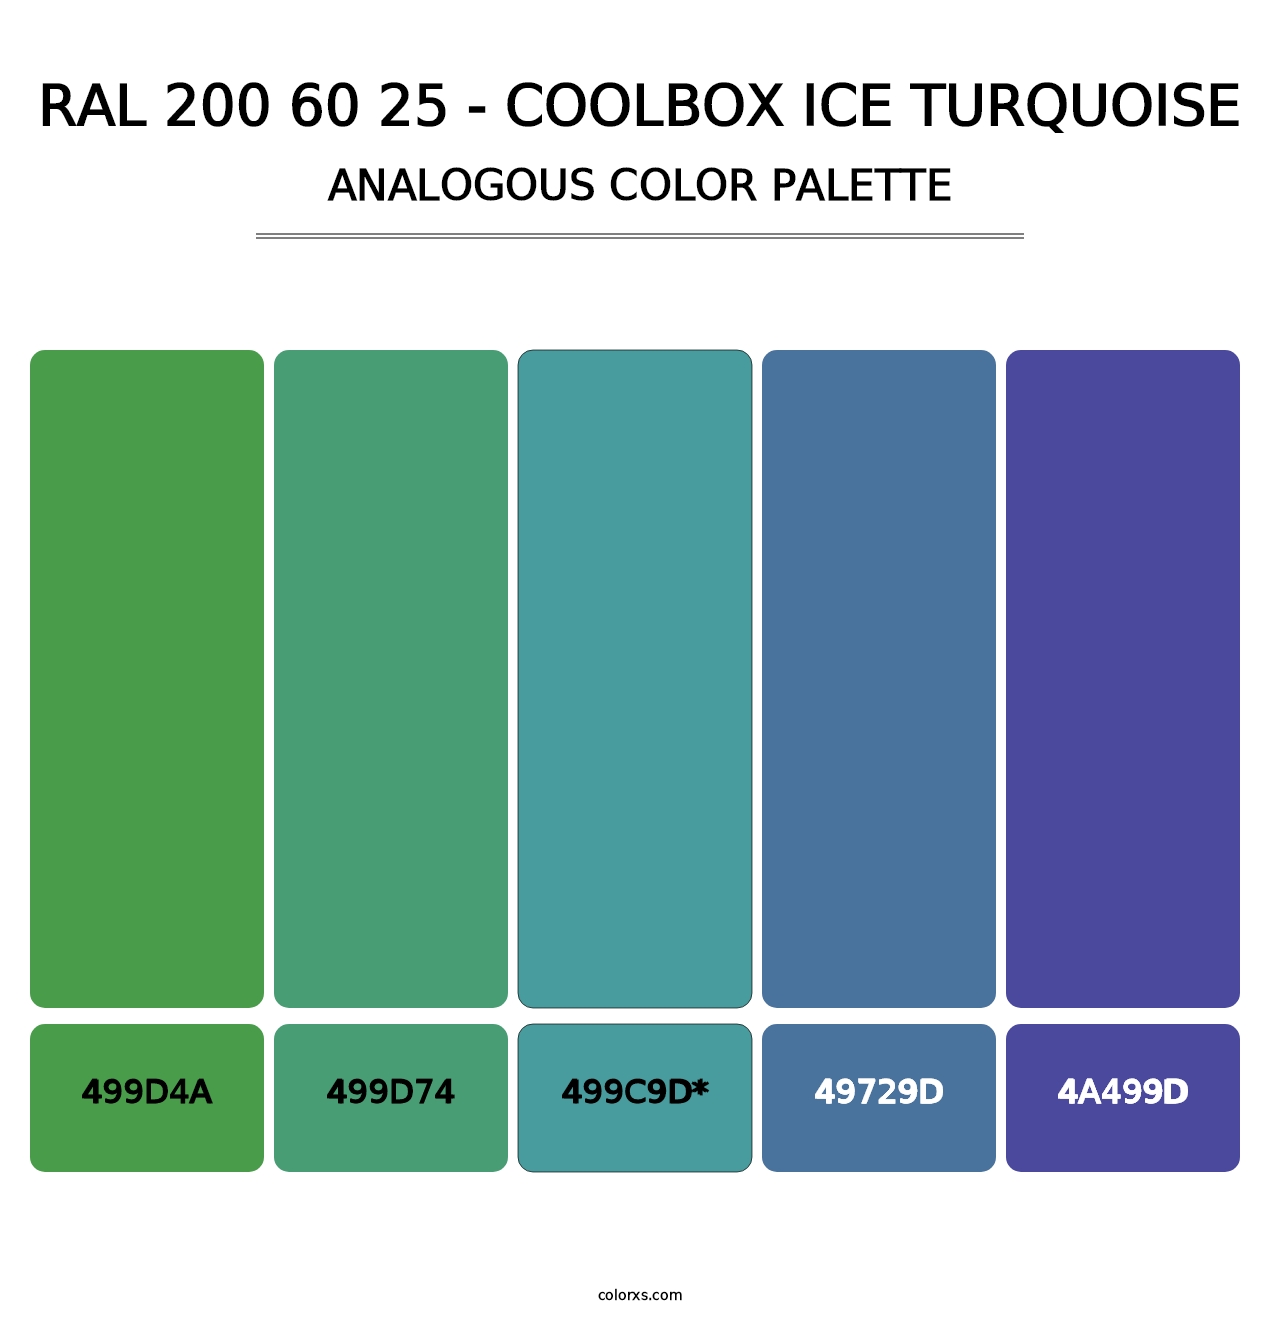 RAL 200 60 25 - Coolbox Ice Turquoise - Analogous Color Palette